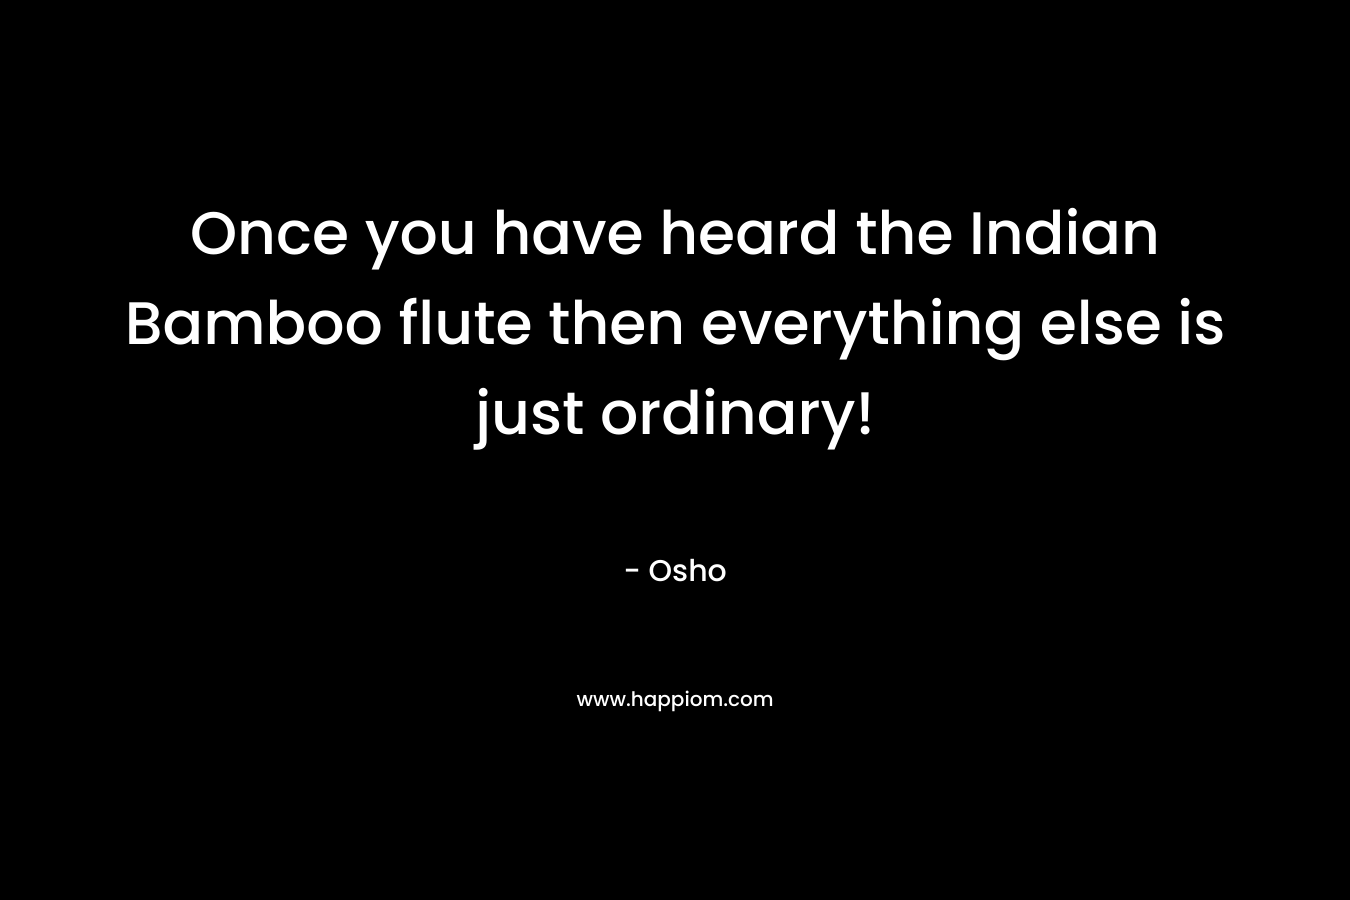 Once you have heard the Indian Bamboo flute then everything else is just ordinary! – Osho